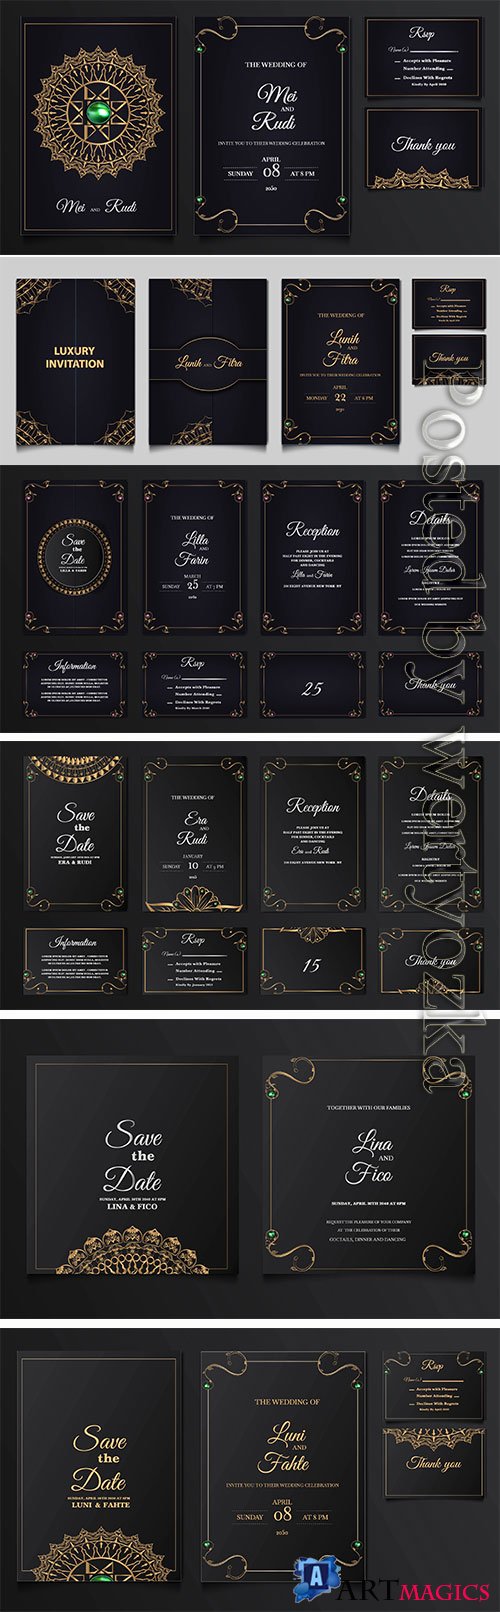 Set collection luxury save the date wedding invitation vector card